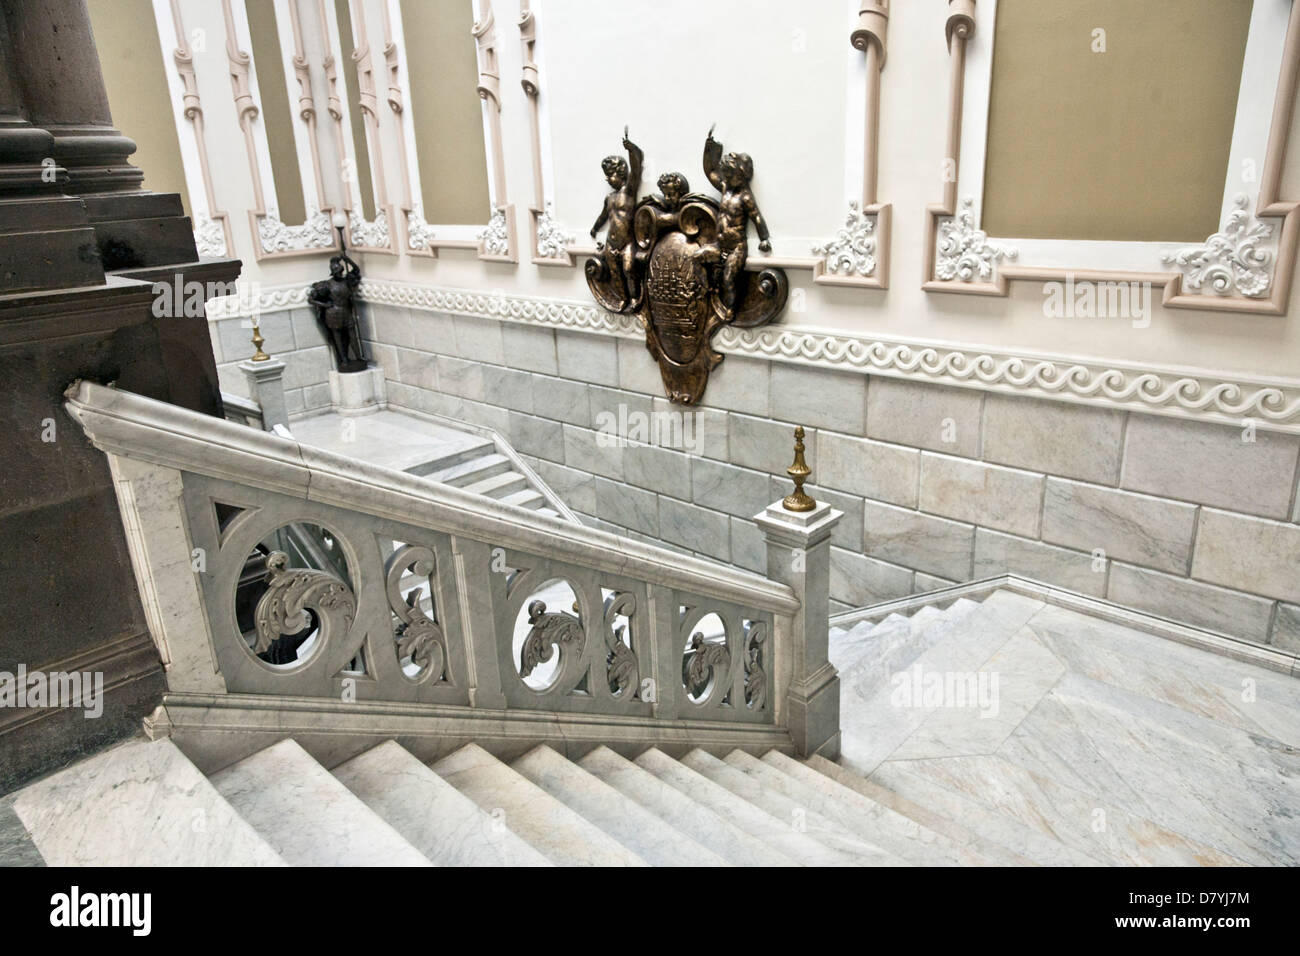 monumental interior marble staircase with carved leaf form balustrade & bronze coat of arms at landing Palacio Municipal Puebla Stock Photo